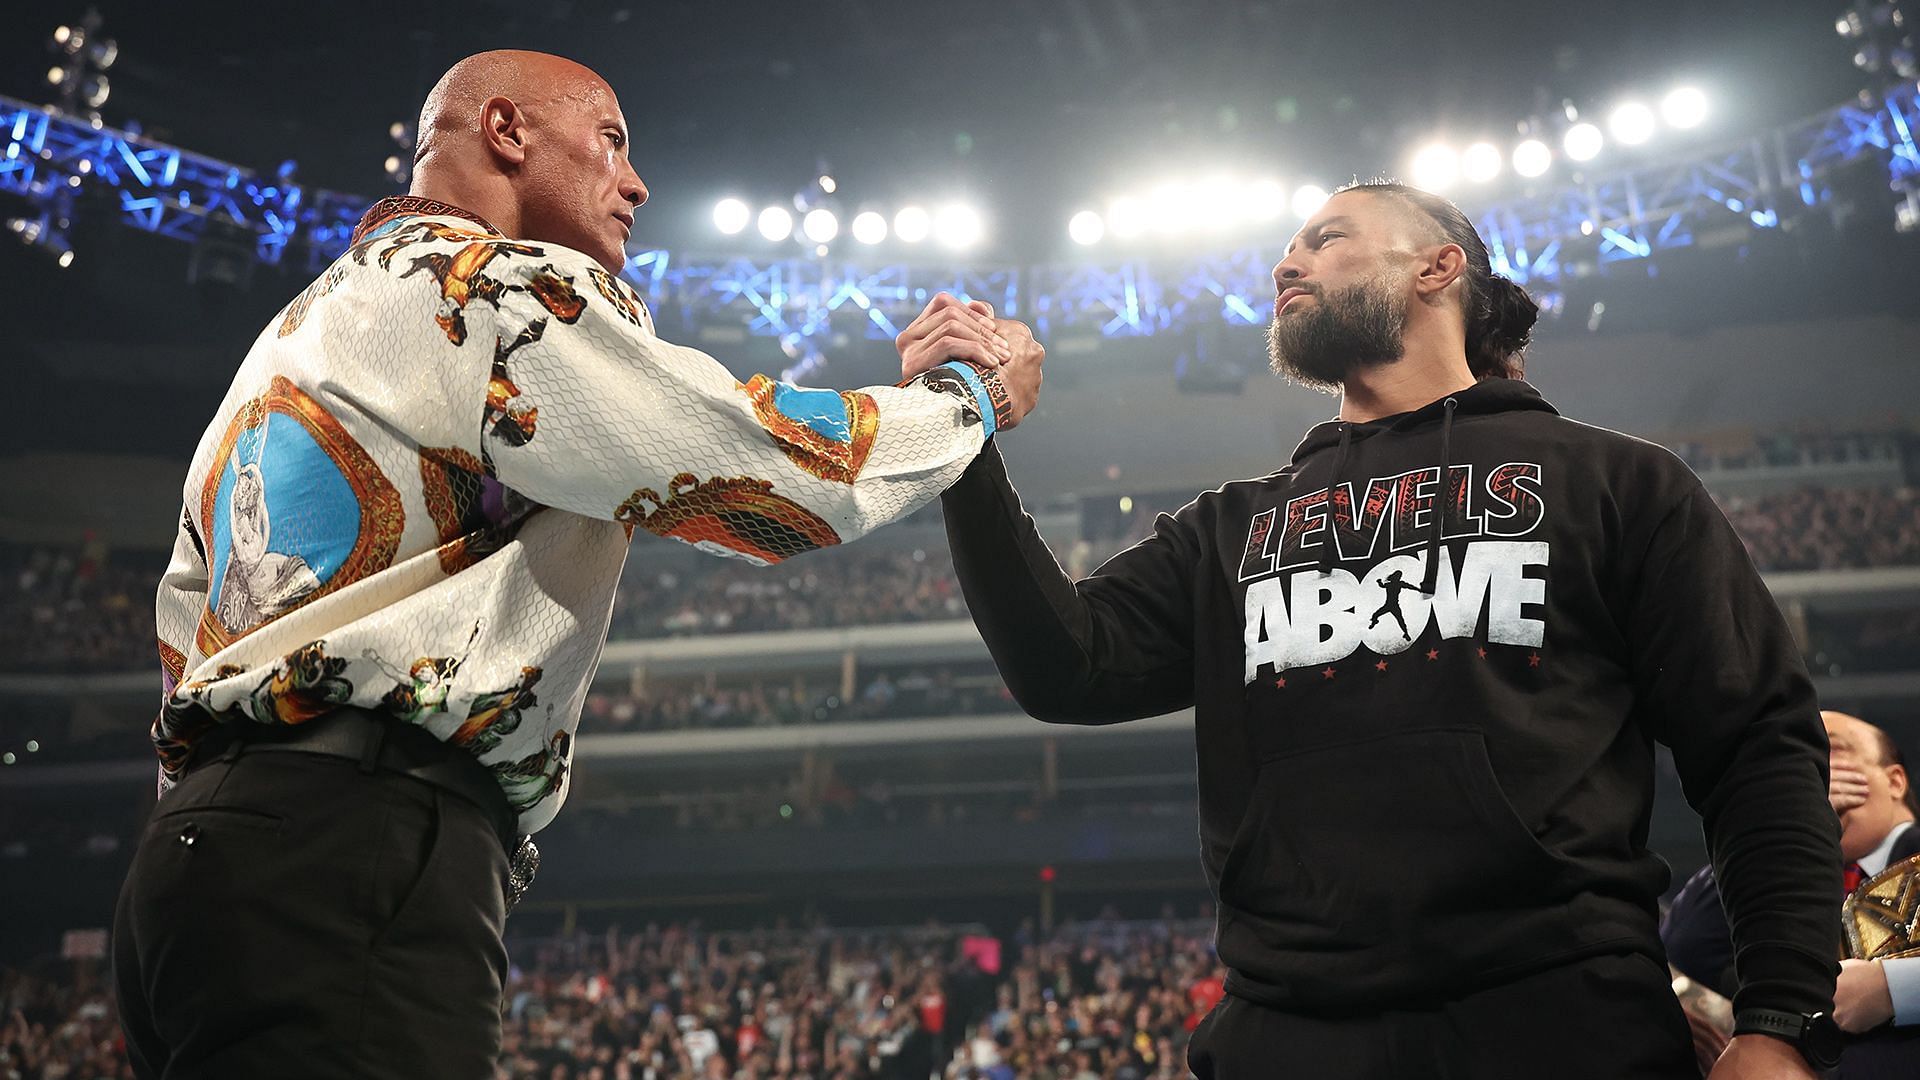 The Rock and Roman Reigns on WWE SmackDown